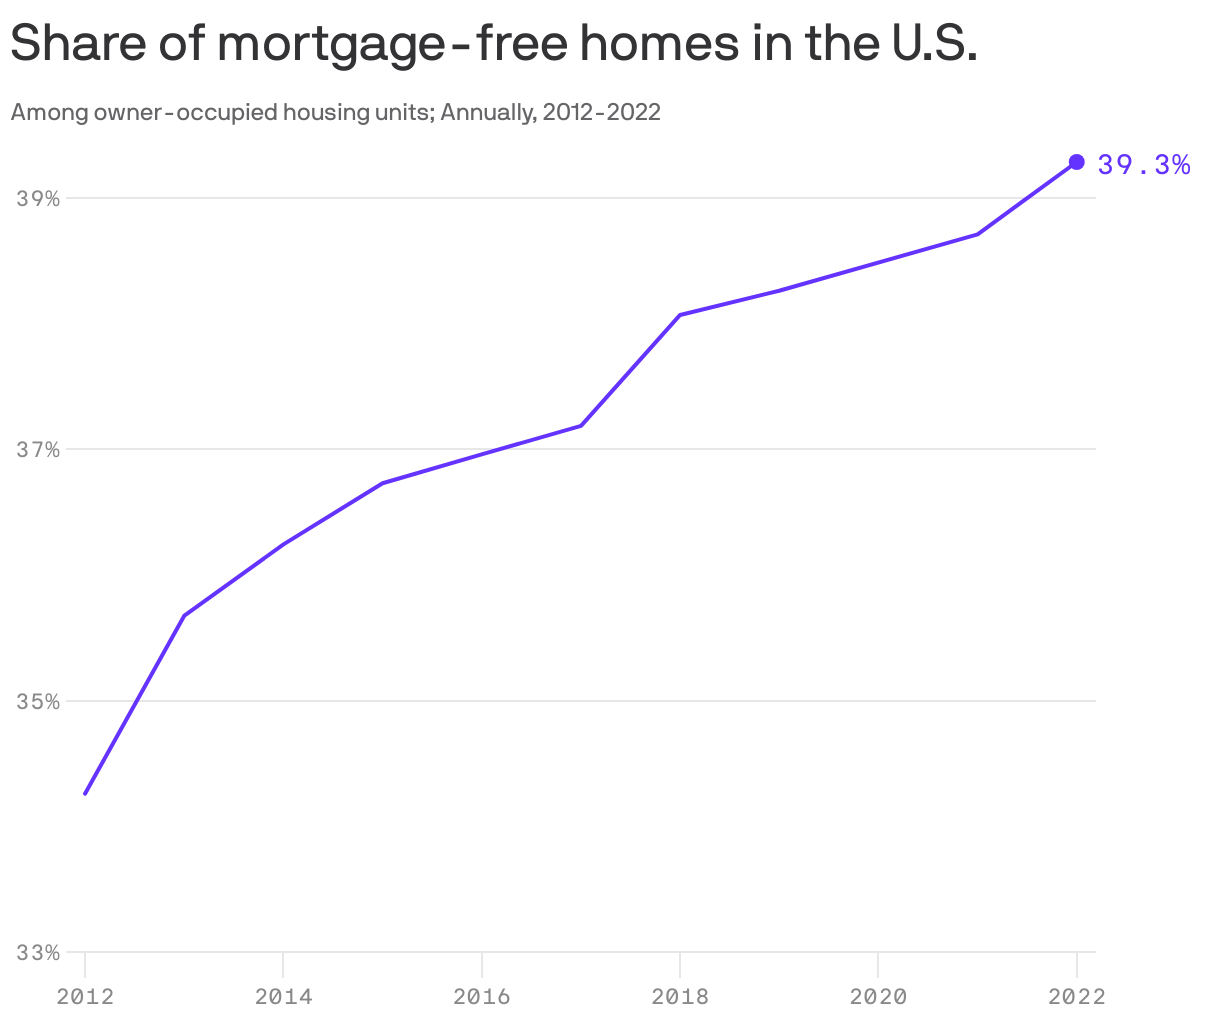 Share of mortgage-free homes in the U.S.